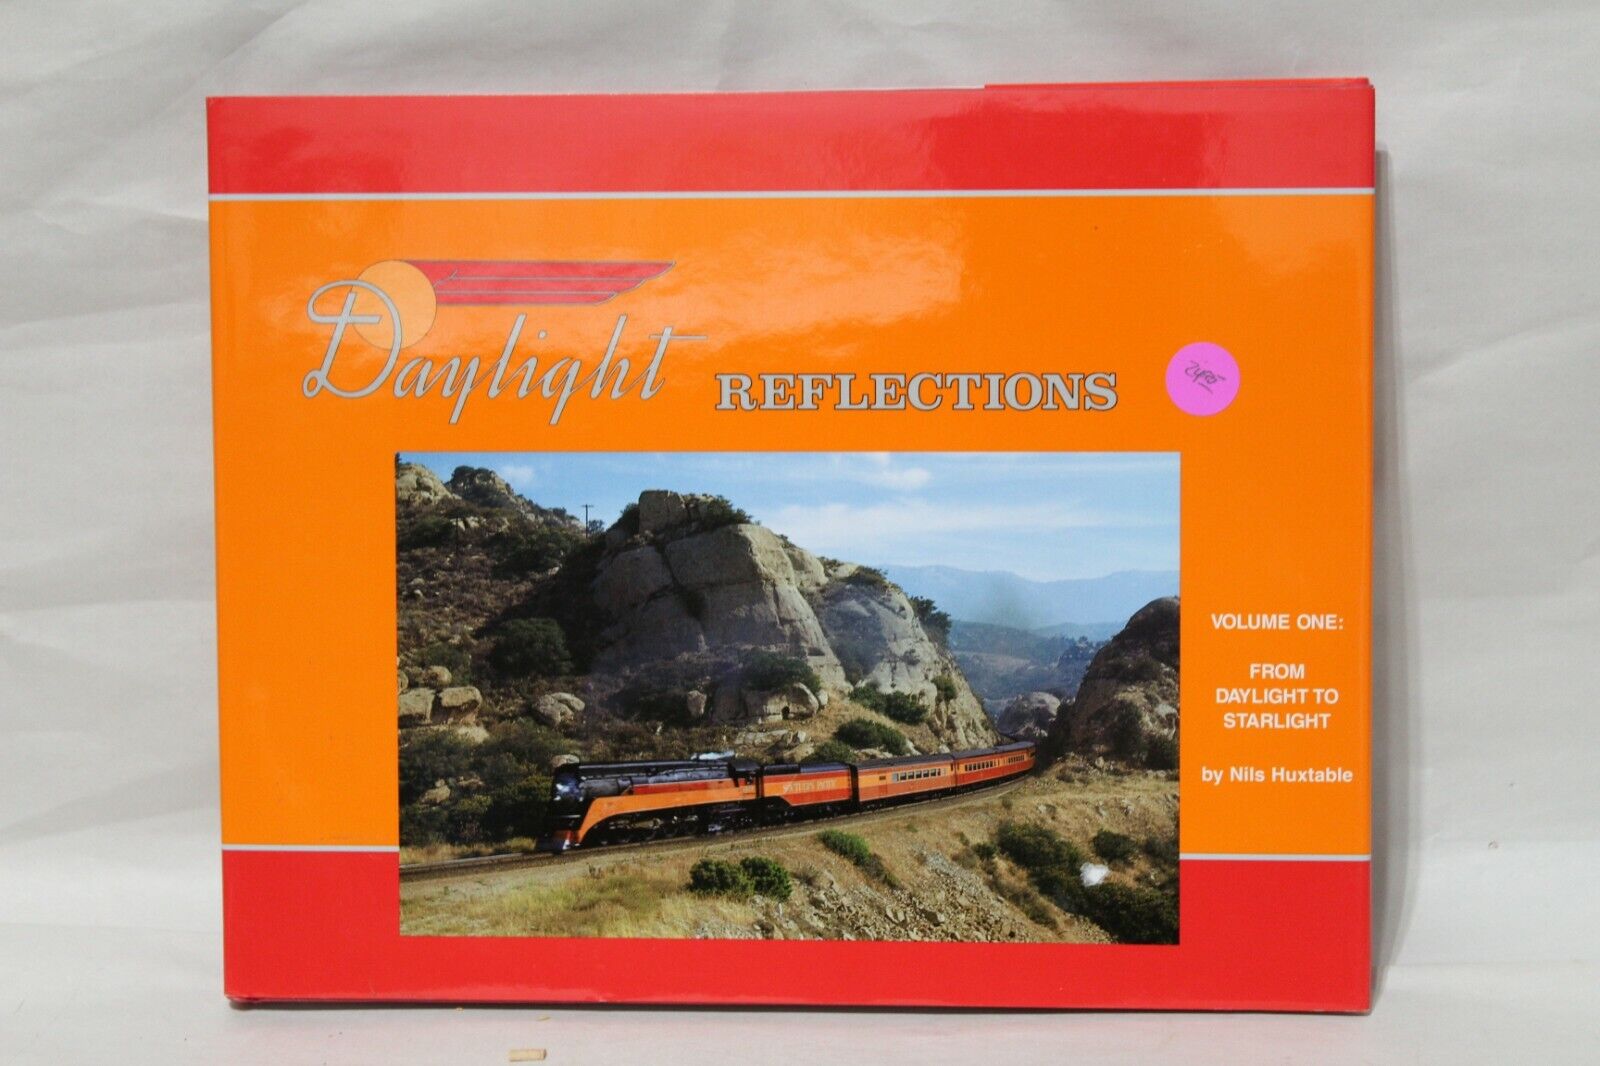 Daylight Reflections: Pictorial Album by Nils Huxtable of a Beautiful Train(650)